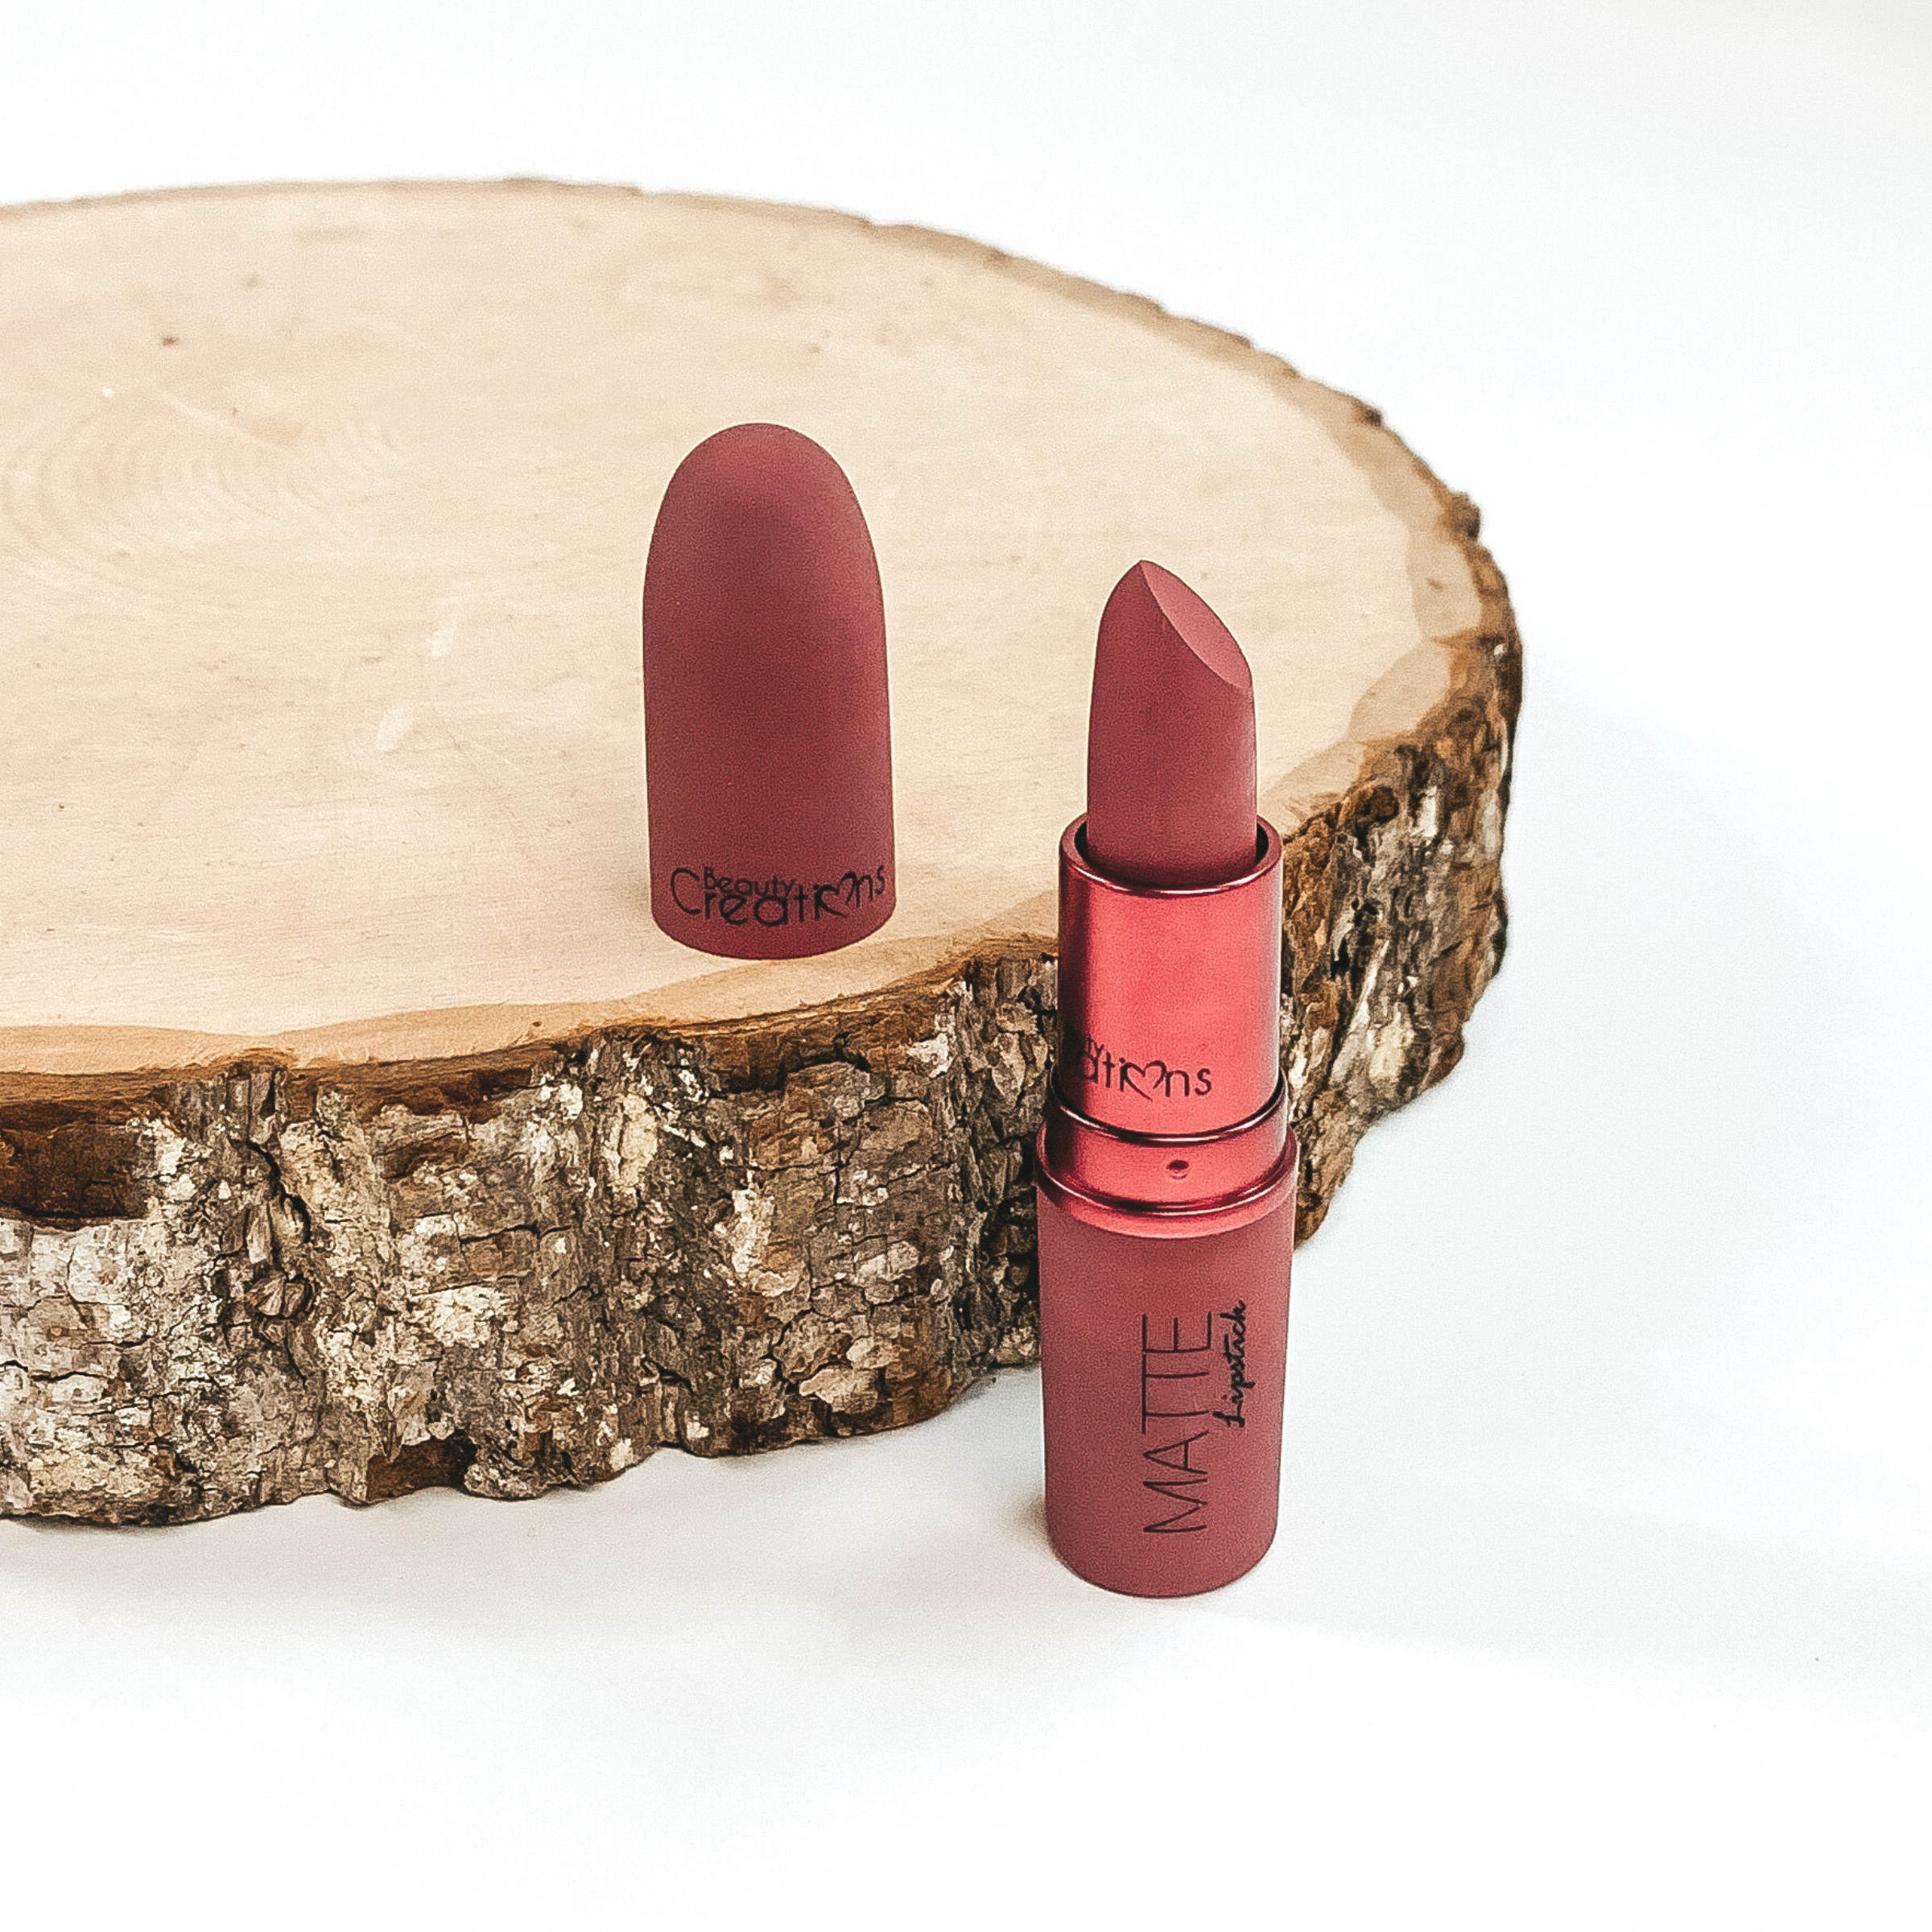 Shade kiss me lipstick that is opened and twisted up. The tube is standing on a white background and next to it is some wood that the lid from the lipstick is placed on.